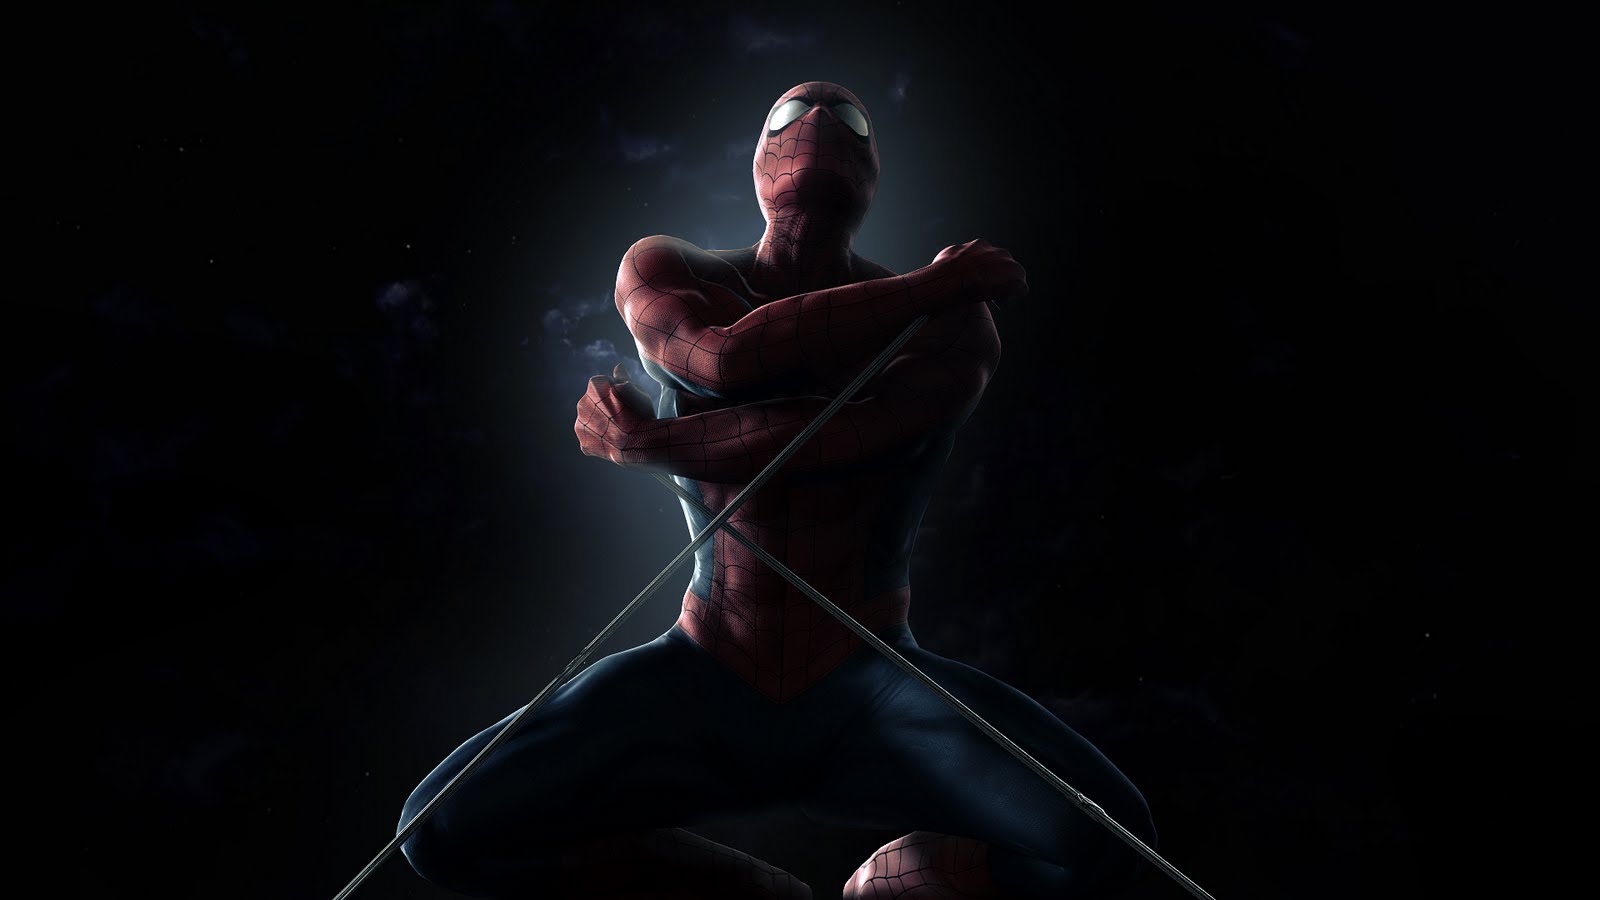 Spiderman 4 HD Wallpapers | Spiderman 4 Images | Cool Wallpapers ...